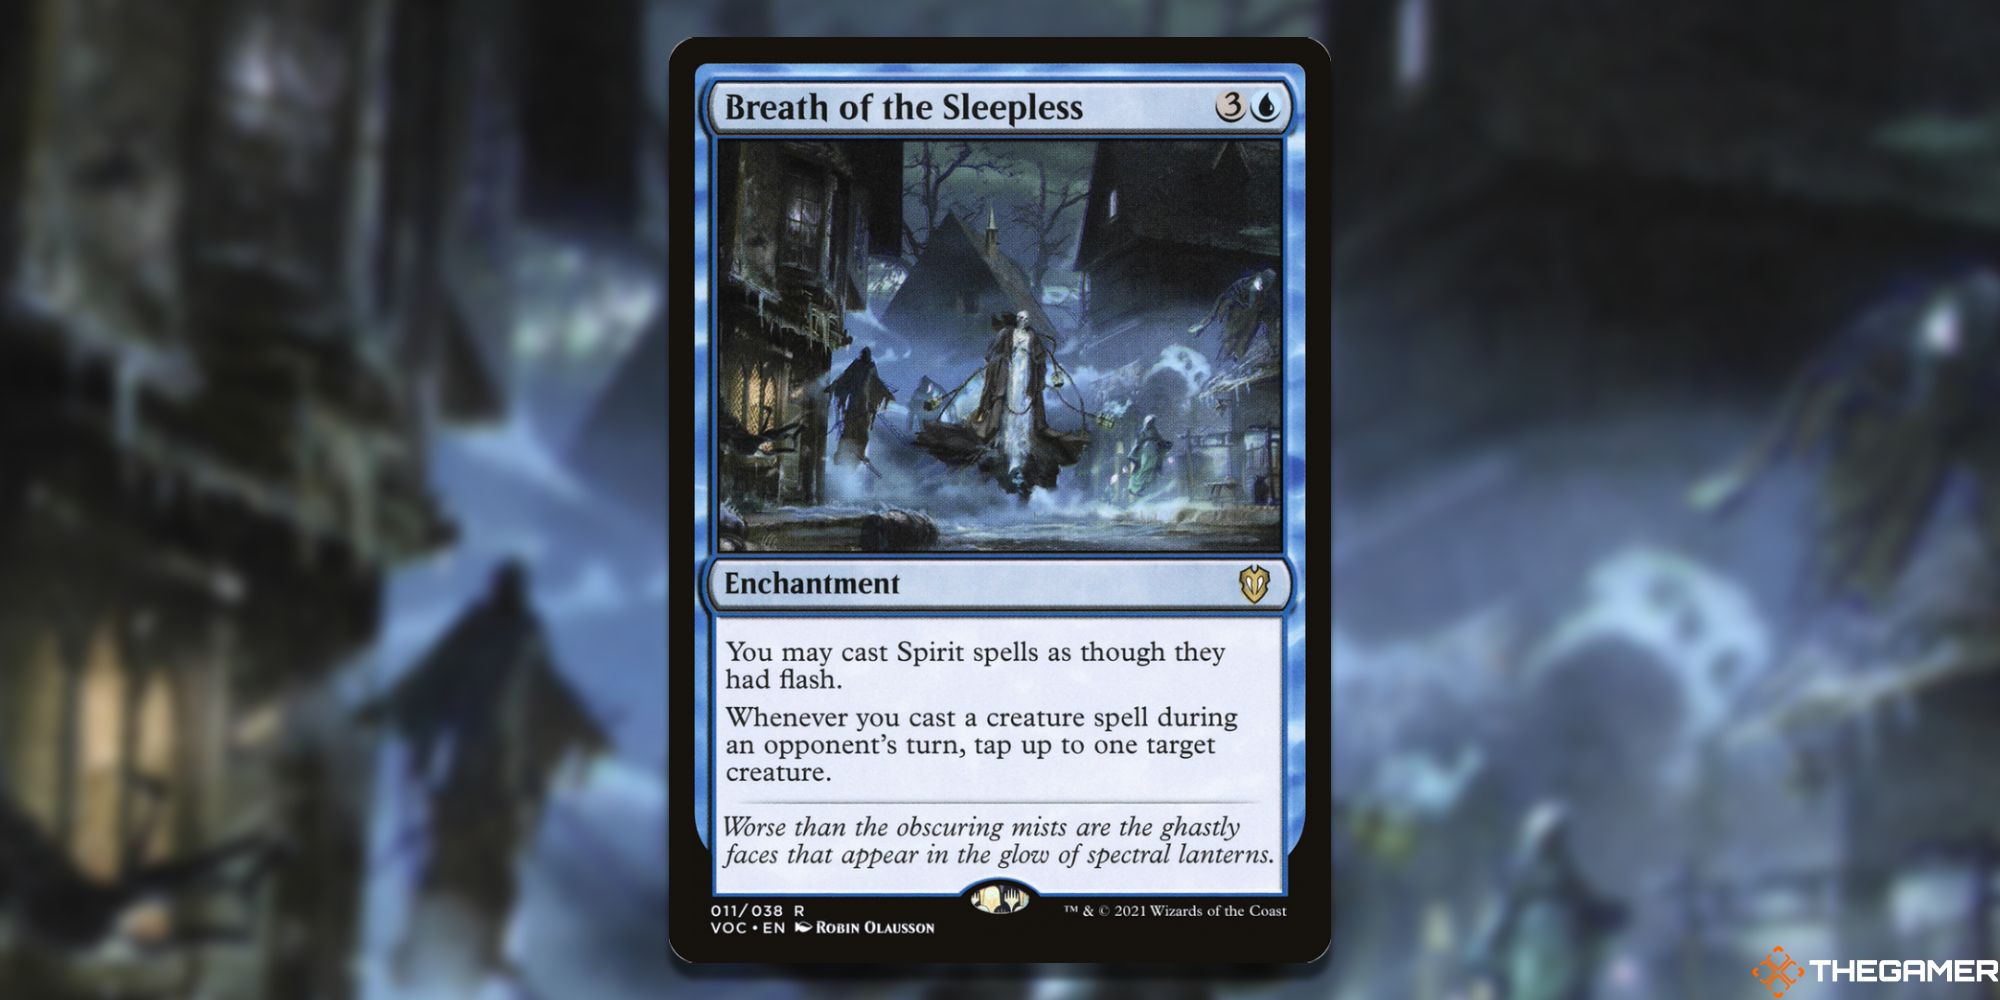 Image of the Breath of the Sleepless card in Magic: The Gathering, with art by Robin Olausson